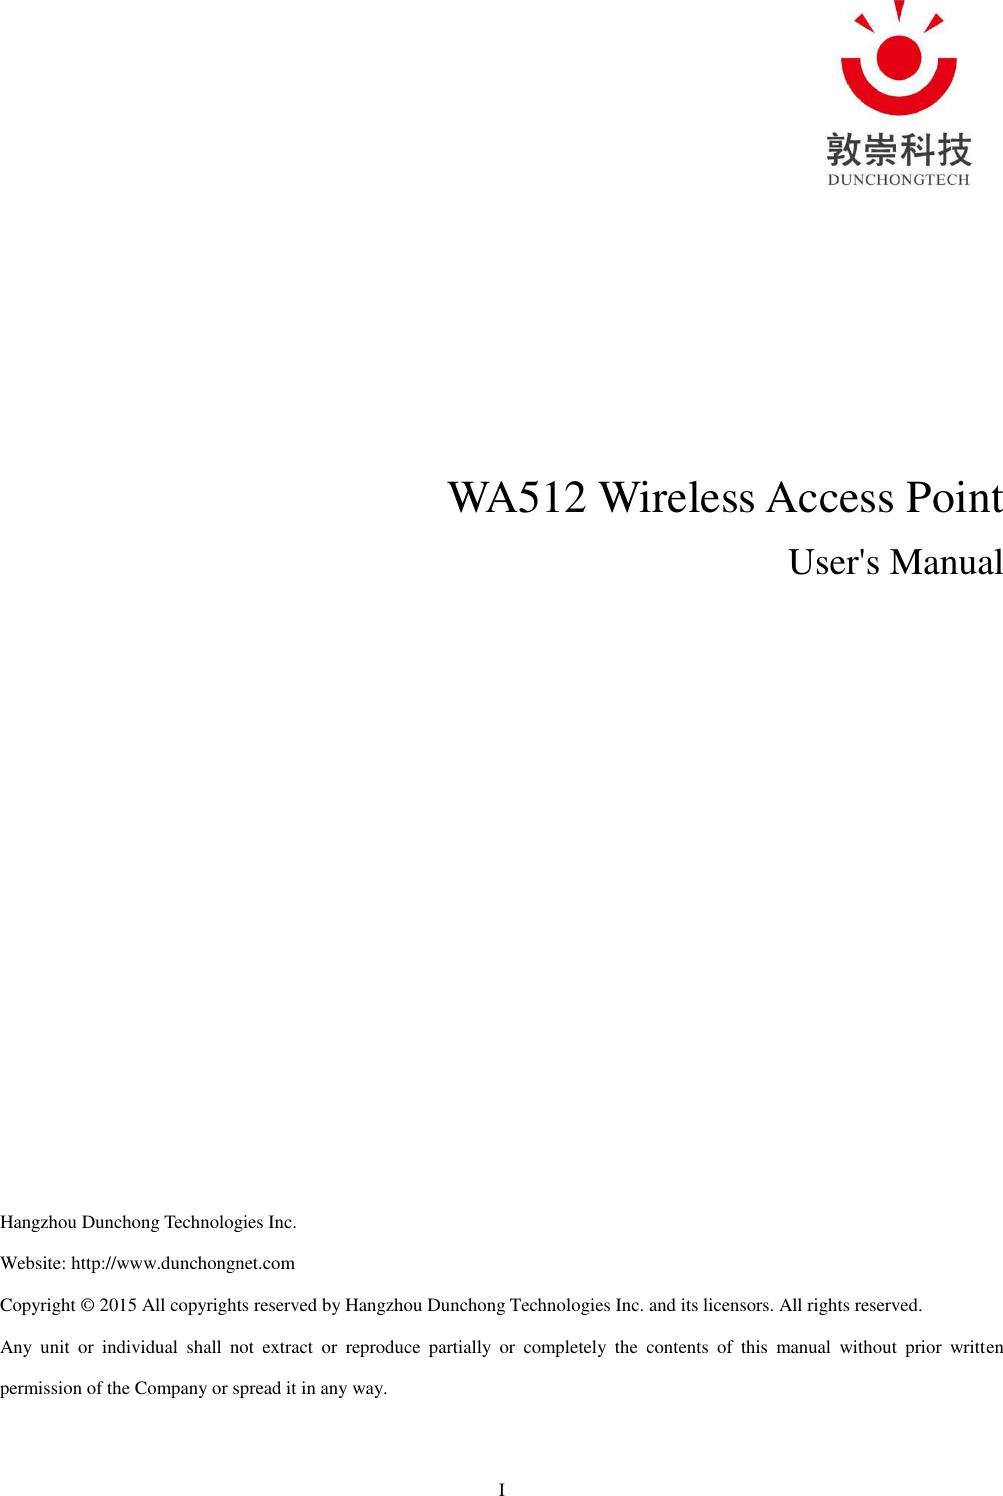 I      WA512 Wireless Access Point   User&apos;s Manual              Hangzhou Dunchong Technologies Inc.   Website: http://www.dunchongnet.com   Copyright © 2015 All copyrights reserved by Hangzhou Dunchong Technologies Inc. and its licensors. All rights reserved.     Any  unit  or  individual  shall  not  extract  or  reproduce  partially  or  completely  the  contents  of  this  manual  without  prior  written permission of the Company or spread it in any way.   